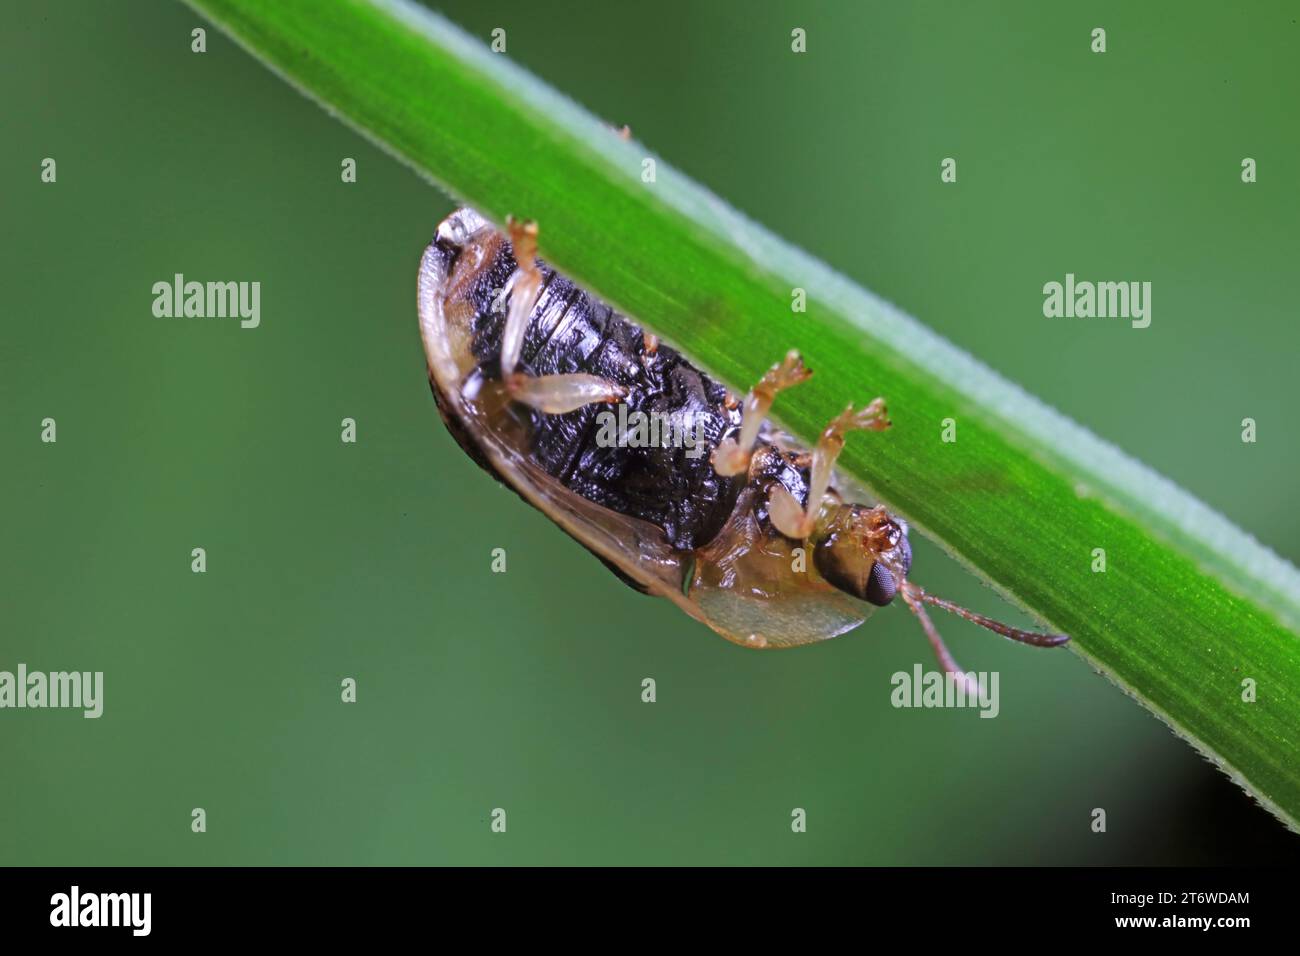 Carabidae insect live on green leaves Stock Photo